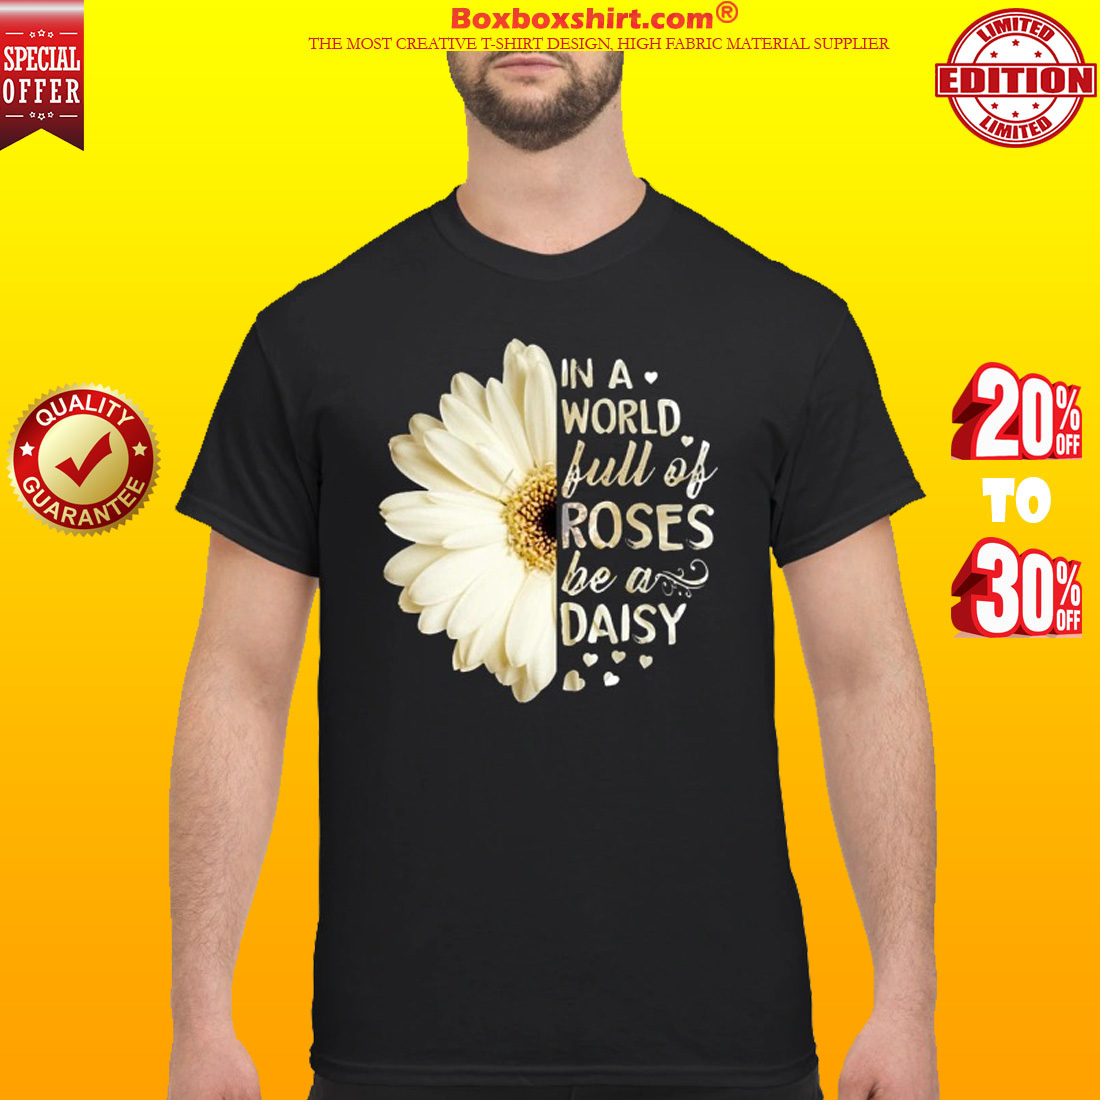 In a world full of roses be a daisy classic shirt